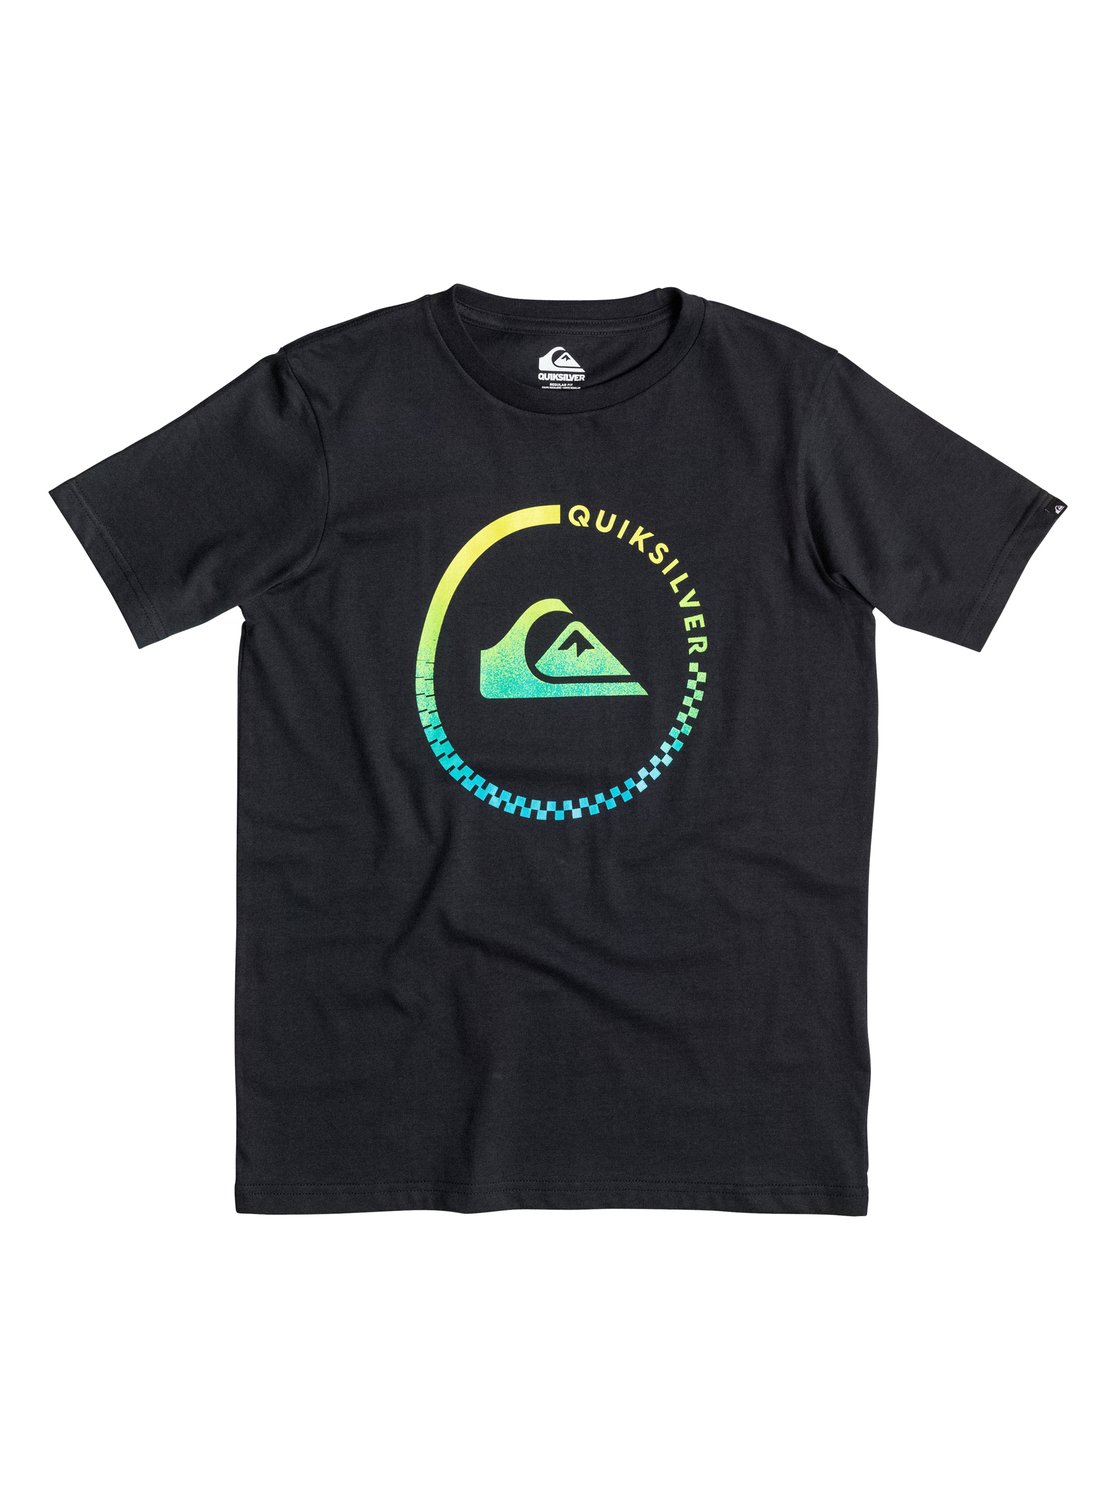 Classic Active Check - T-Shirt - Quiksilver<br>